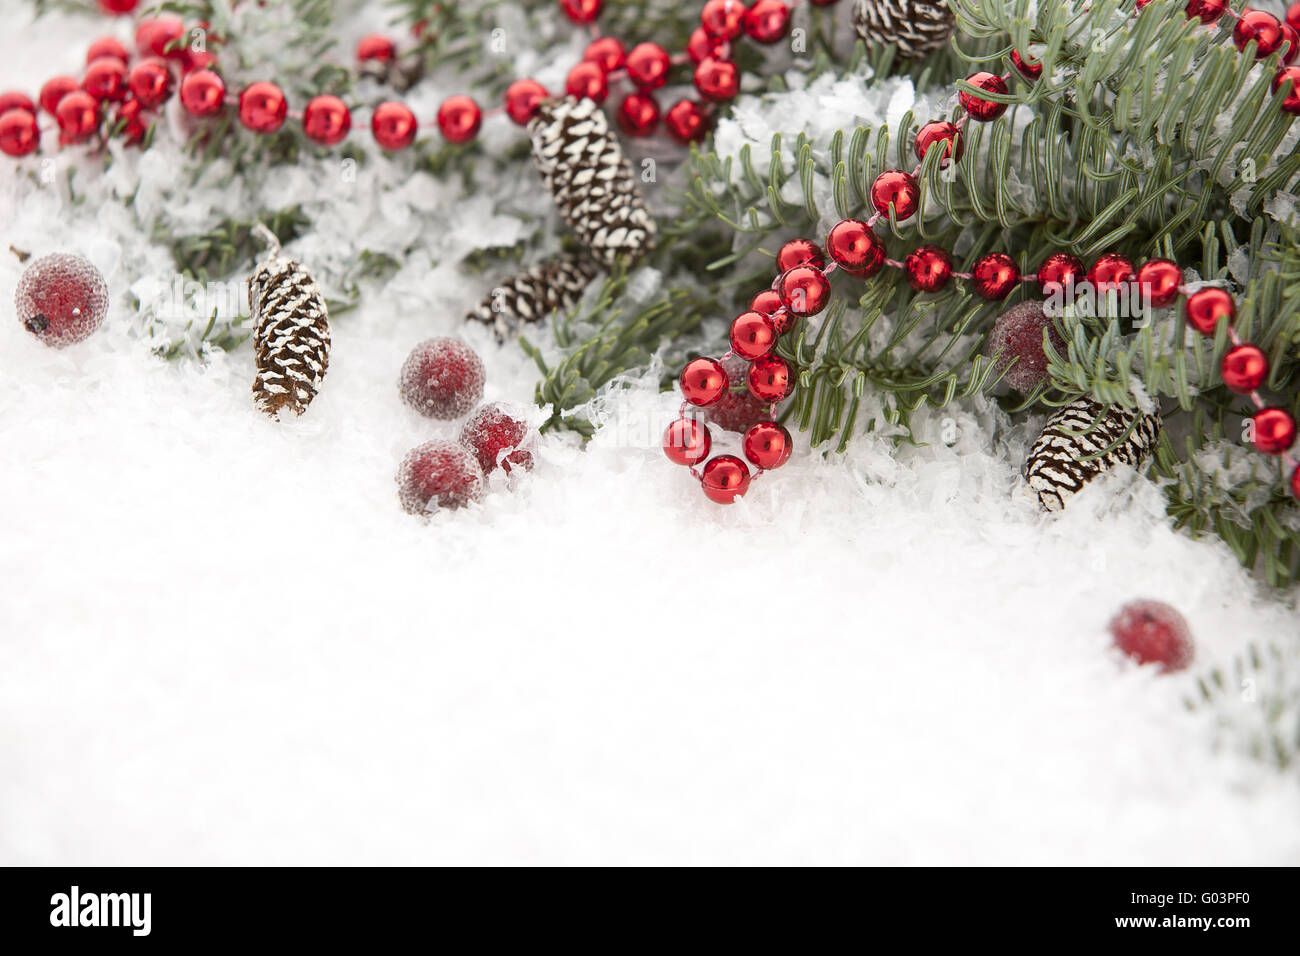 Blue spruce in snow and Christmas decorations Stock Photo